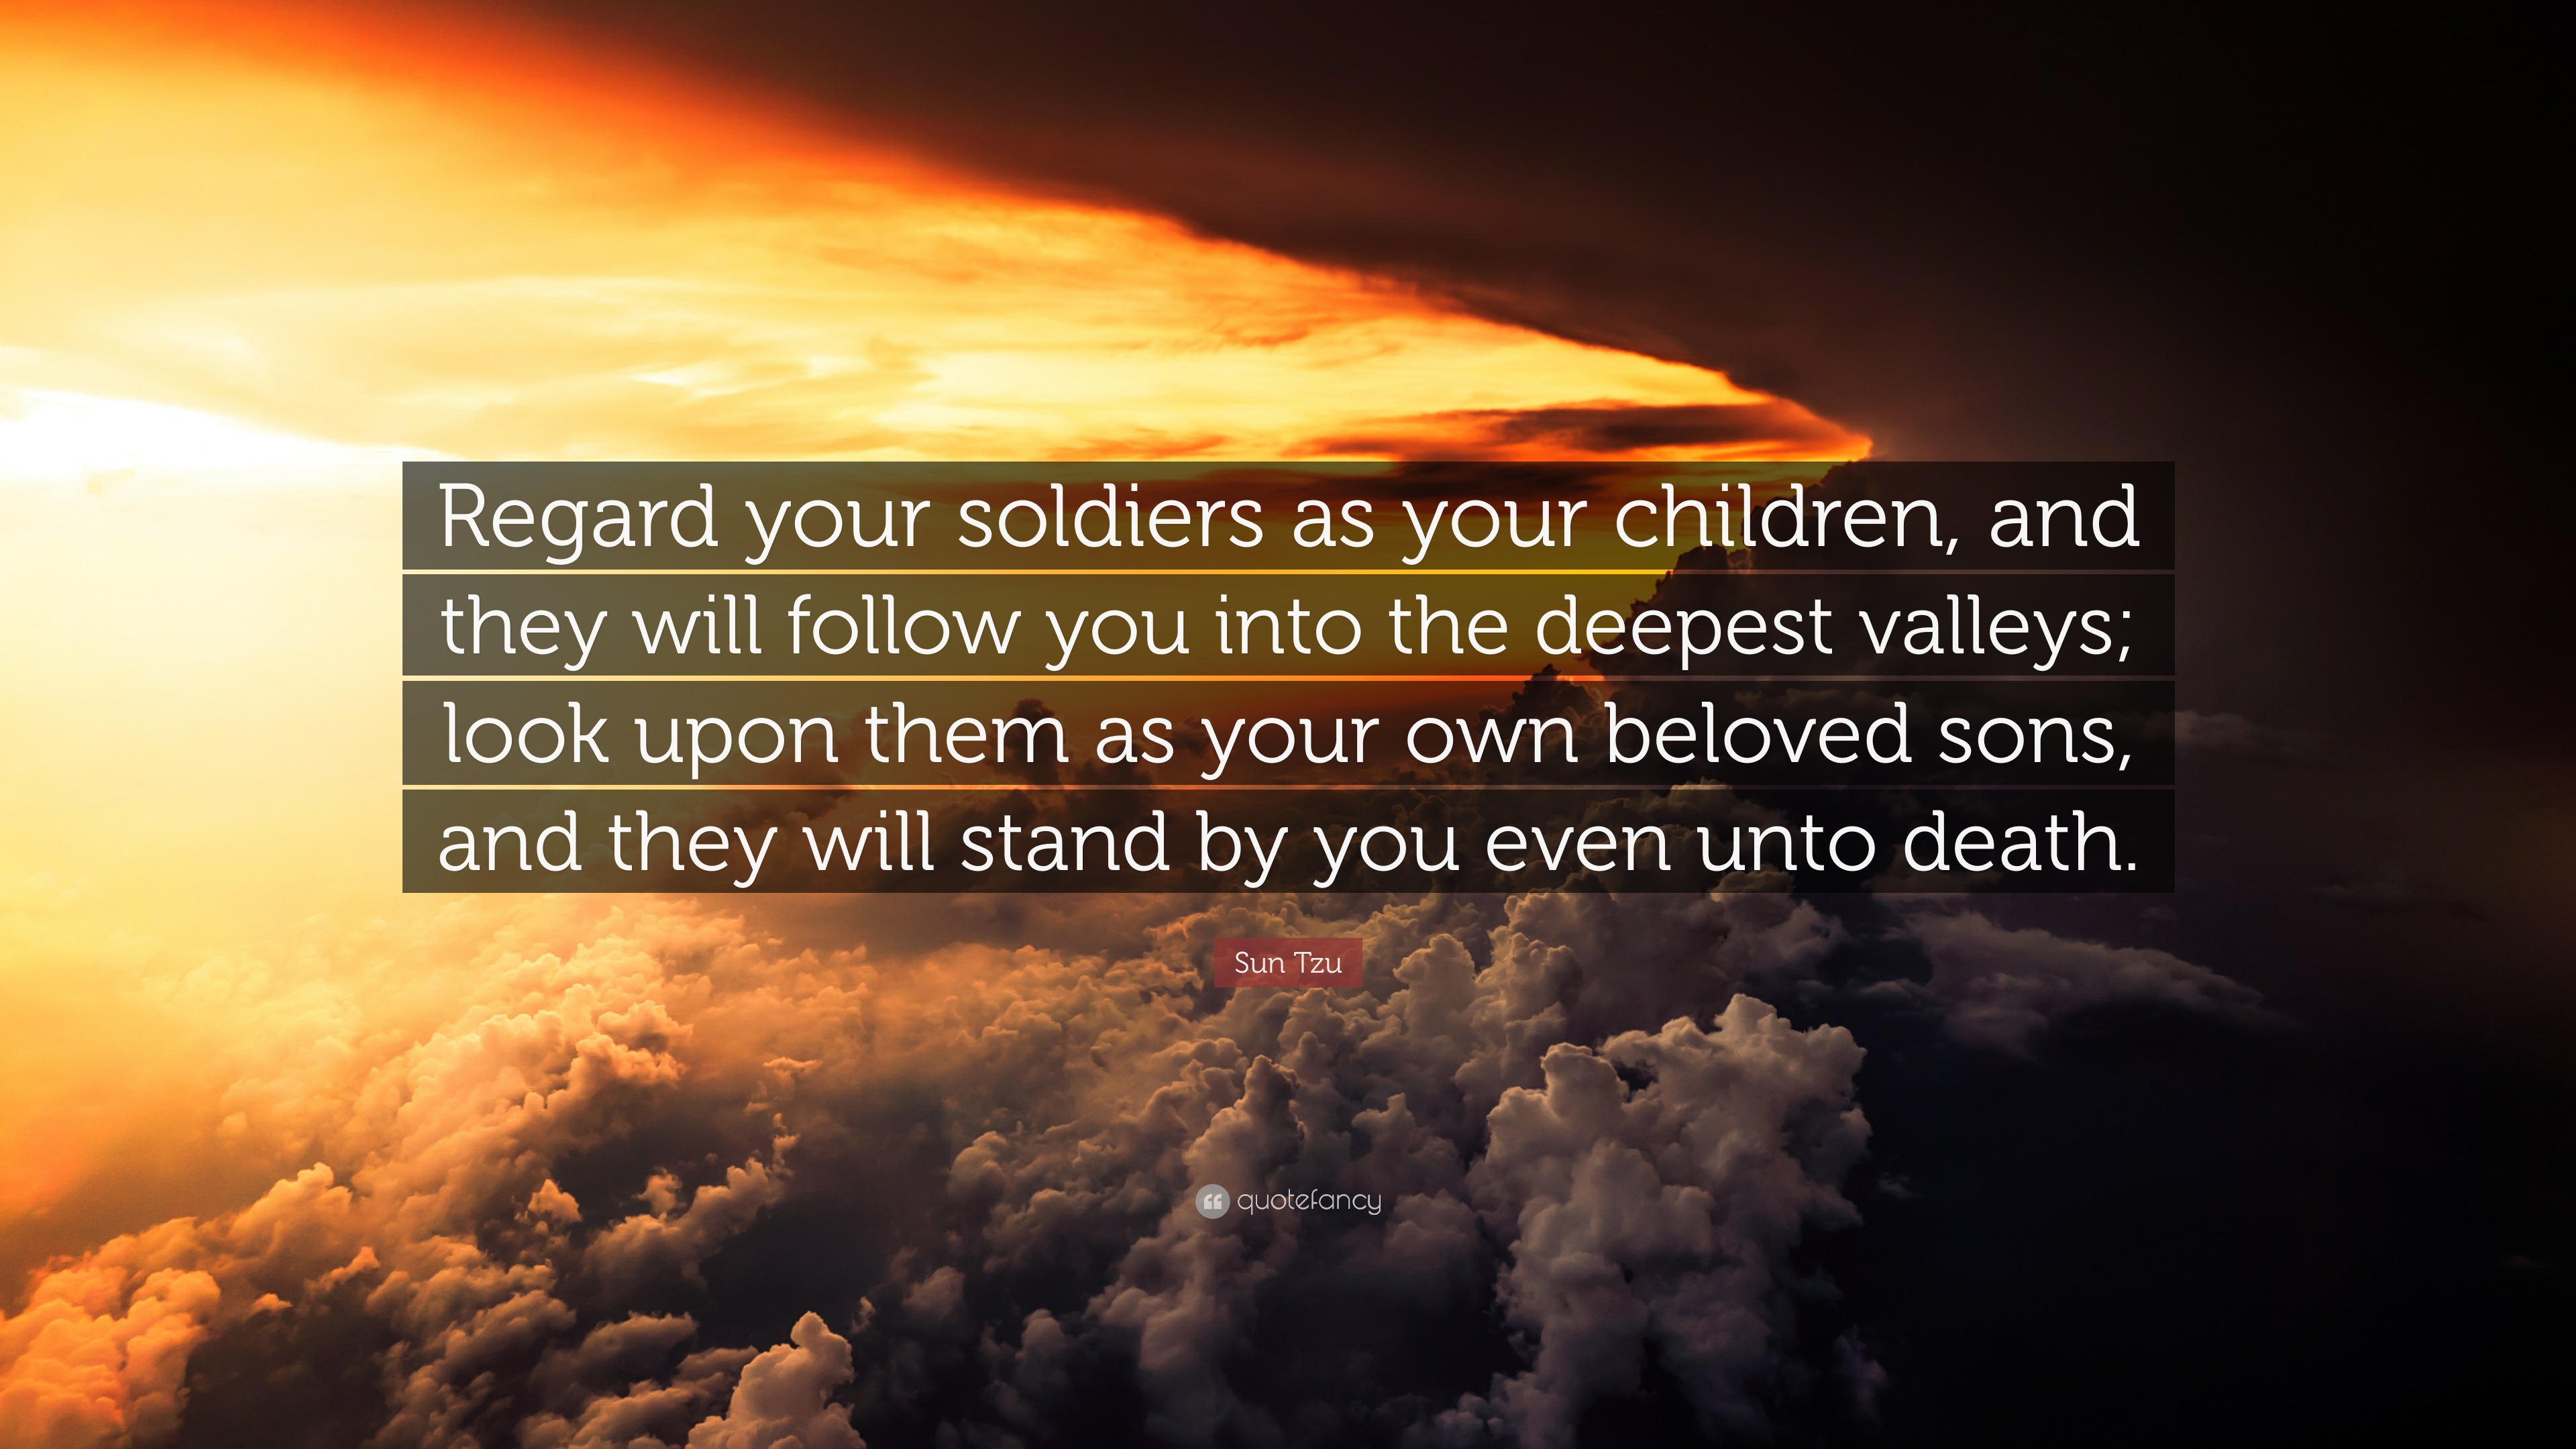 Sun Tzu Quote Regard Your Soldiers As Your Children And They Will Follow You Into The Deepest Valleys Look Upon Them As Your Own Bel 7 Wallpapers Quotefancy